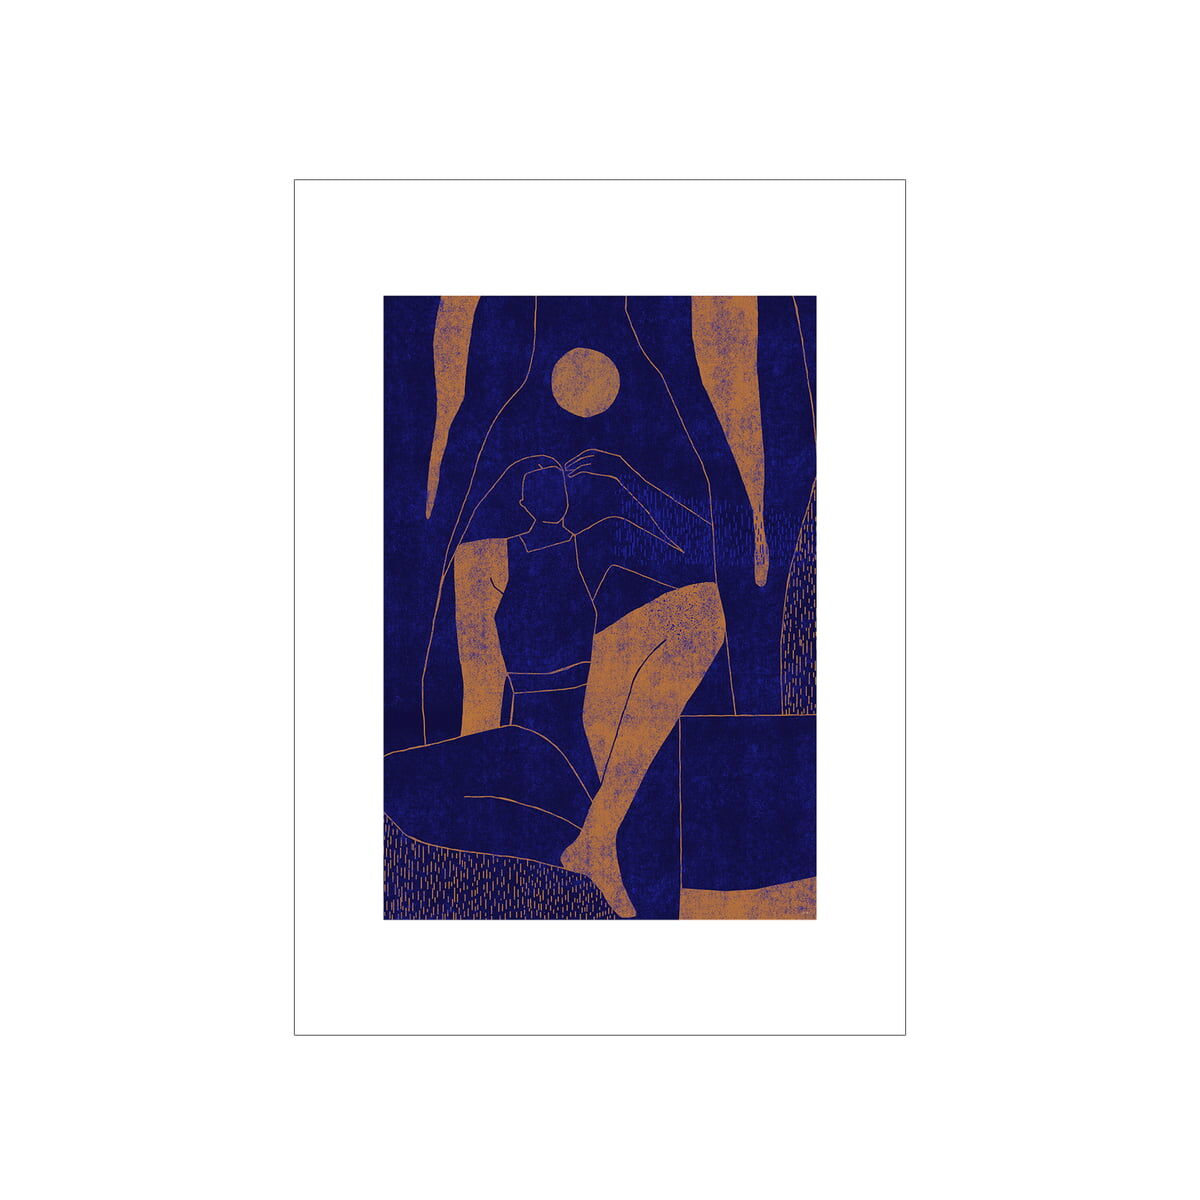 Paper Collective - Mujer y Calor Poster 01, 50 x 70 cm